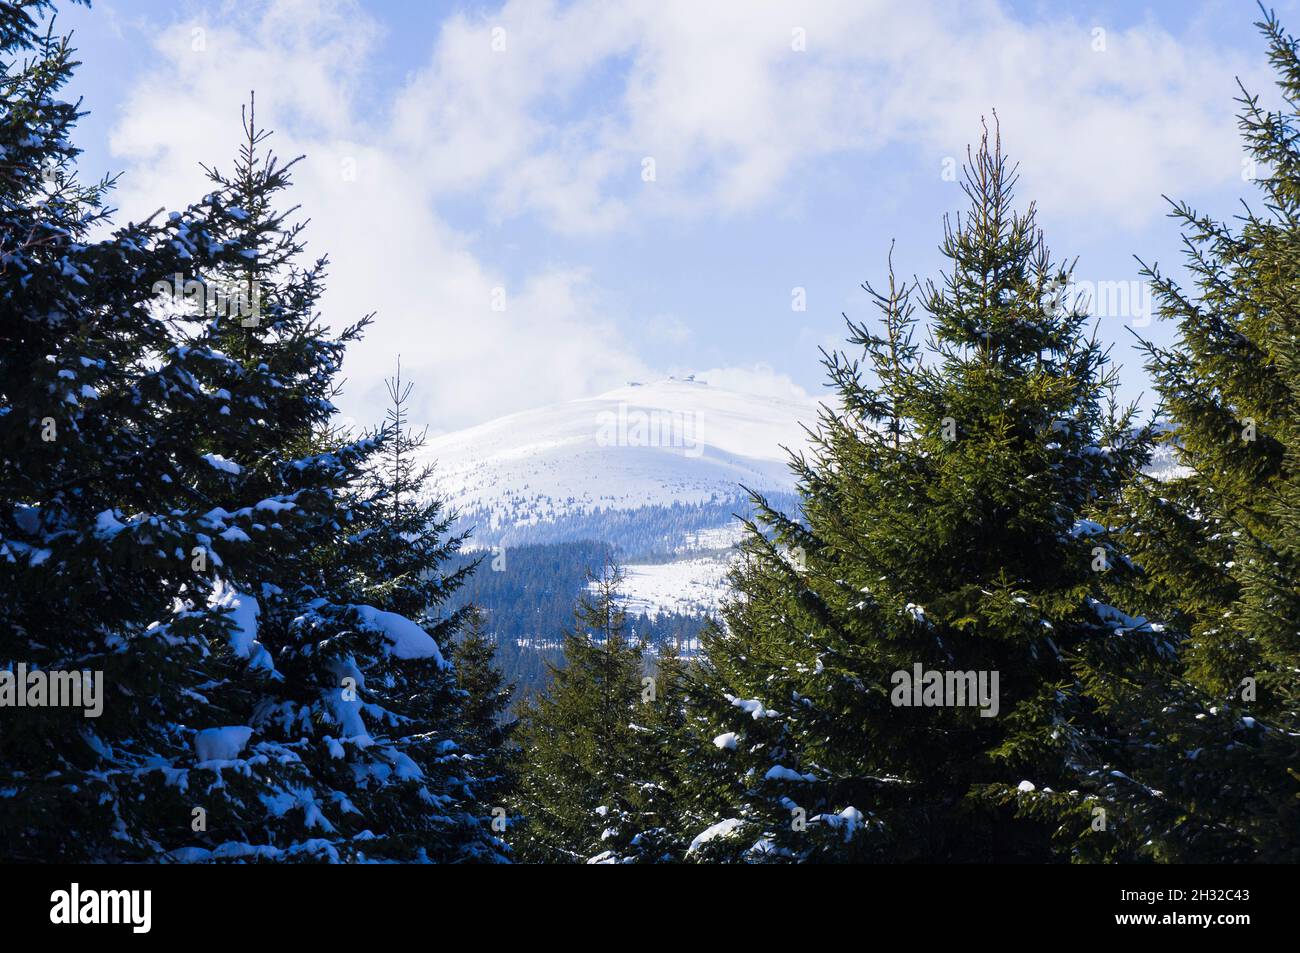 The Snezka mountain (1603) on the border between the Czech Republic and Poland, the highest peak in the Giant Mountains and the Czech Republic, on Mar Stock Photo